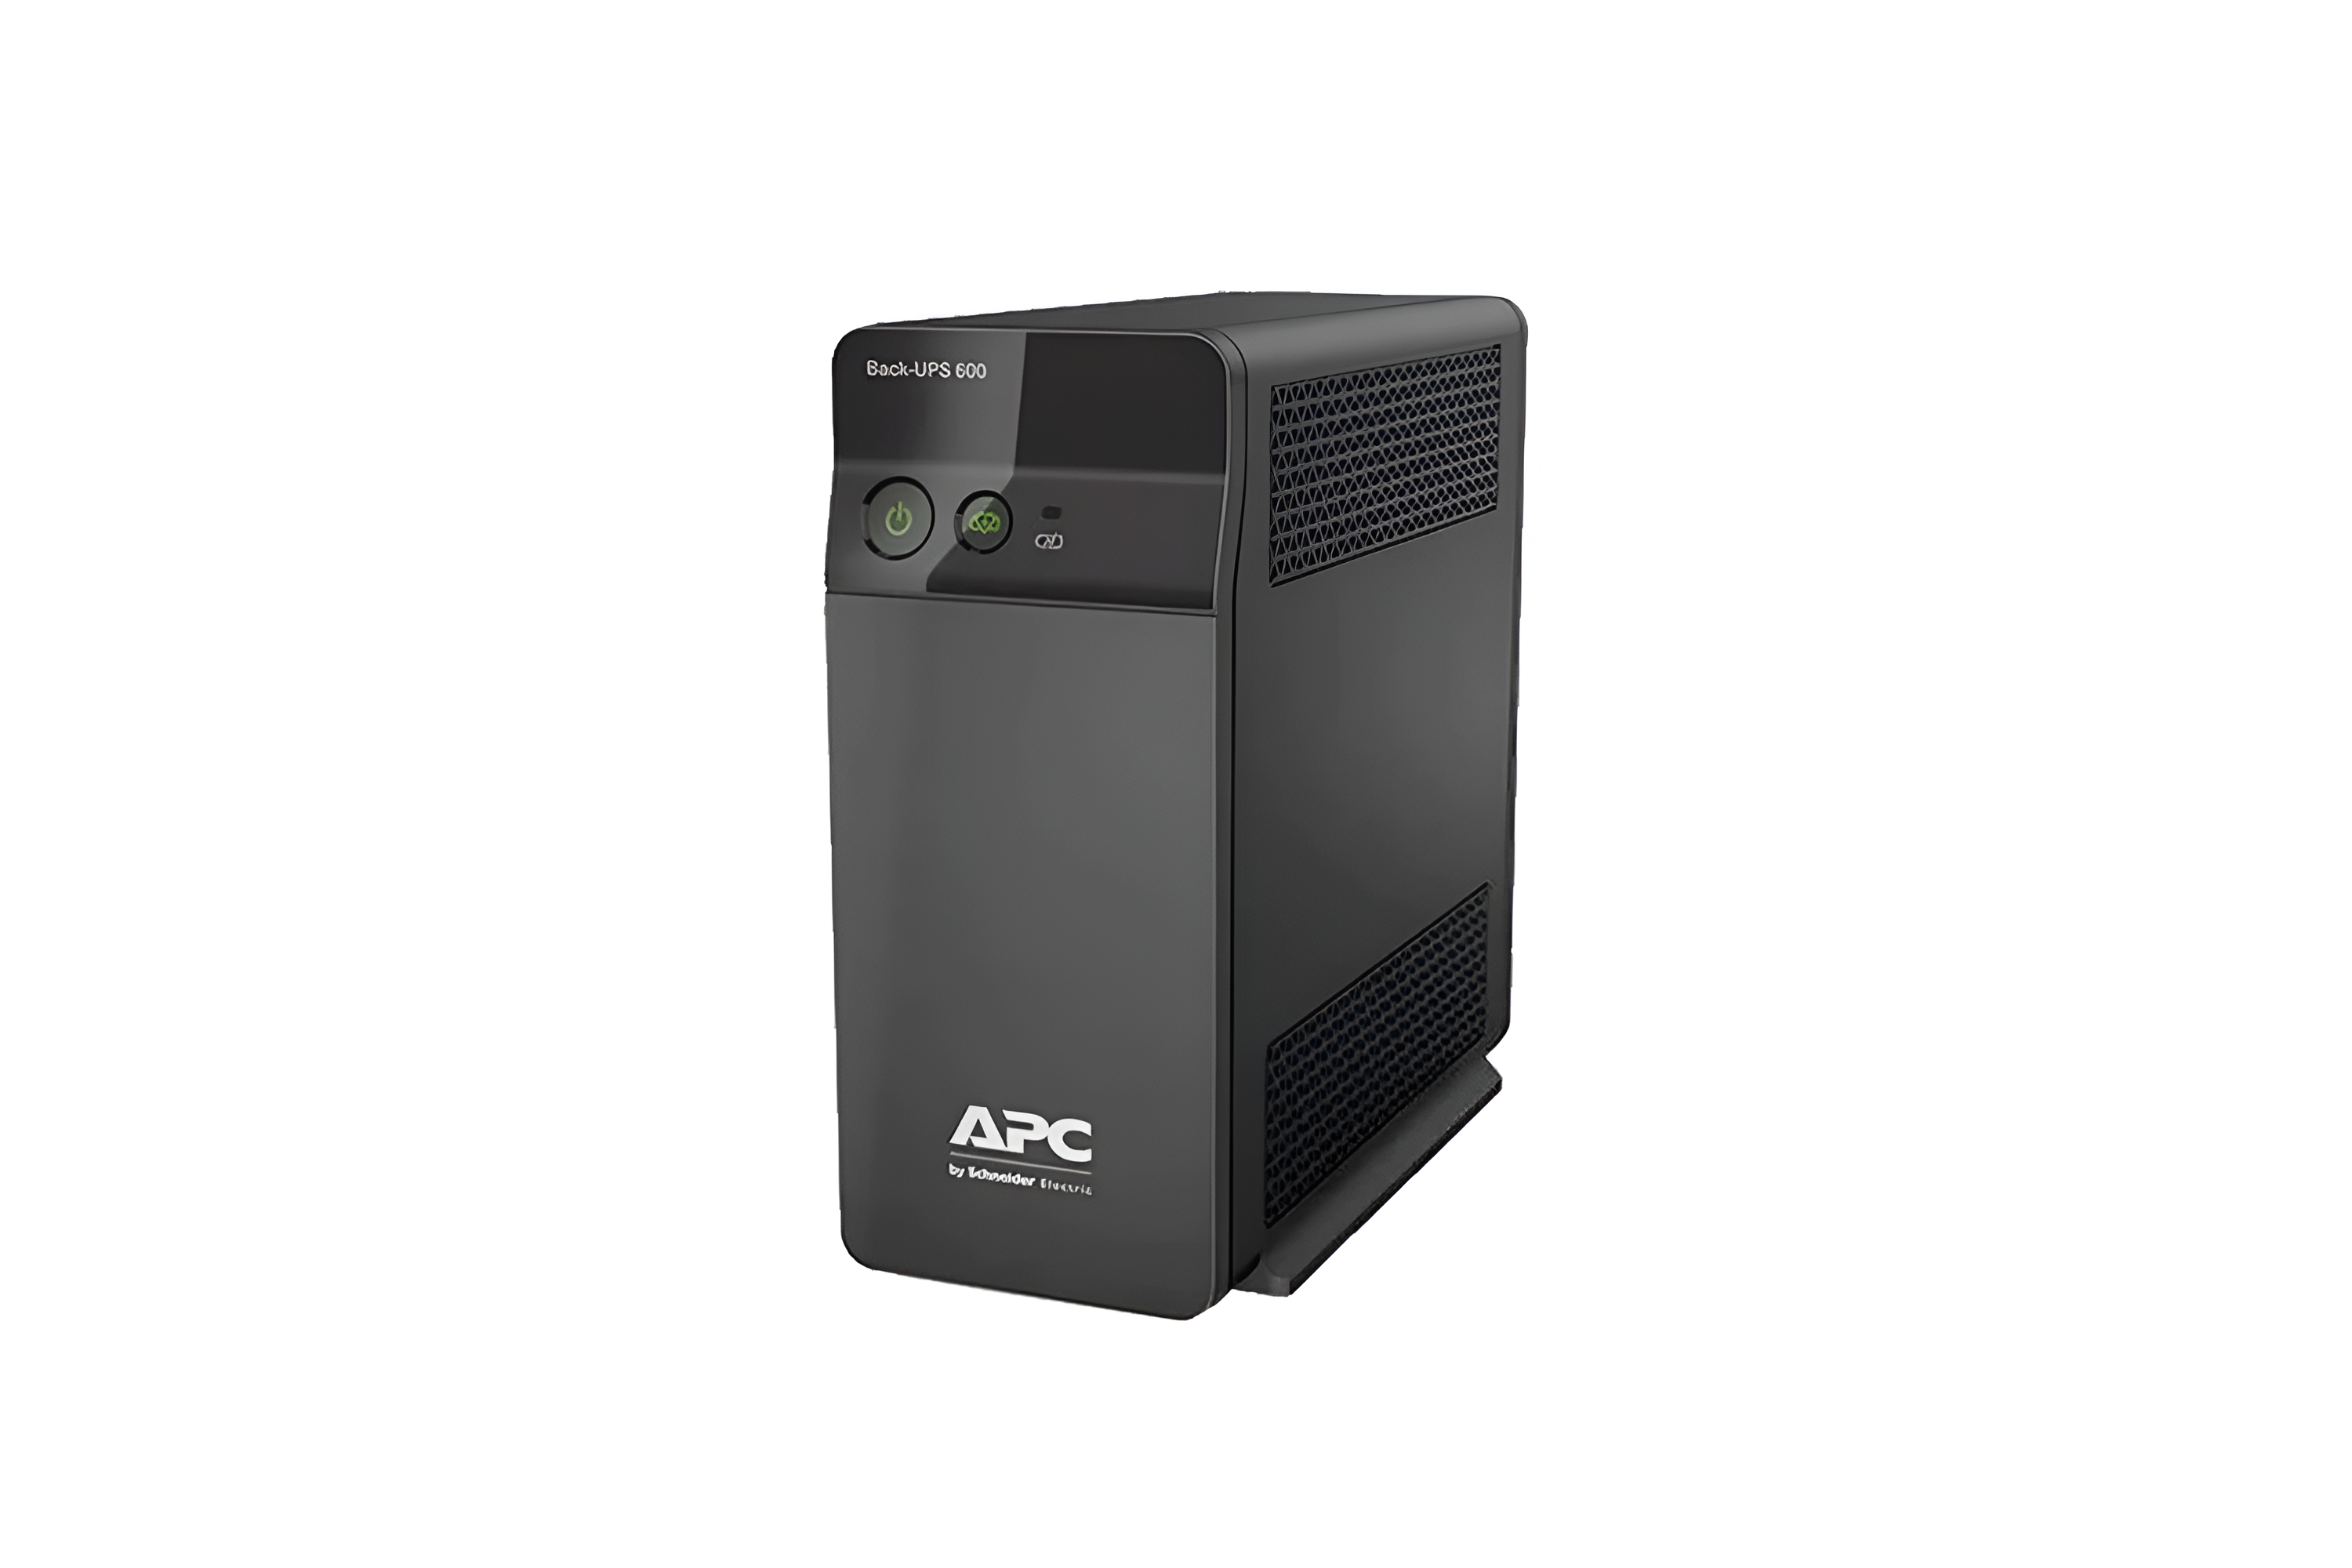 APC BX600C-IN 600VA UPS: Protect Your Devices from Power Outages and S ...